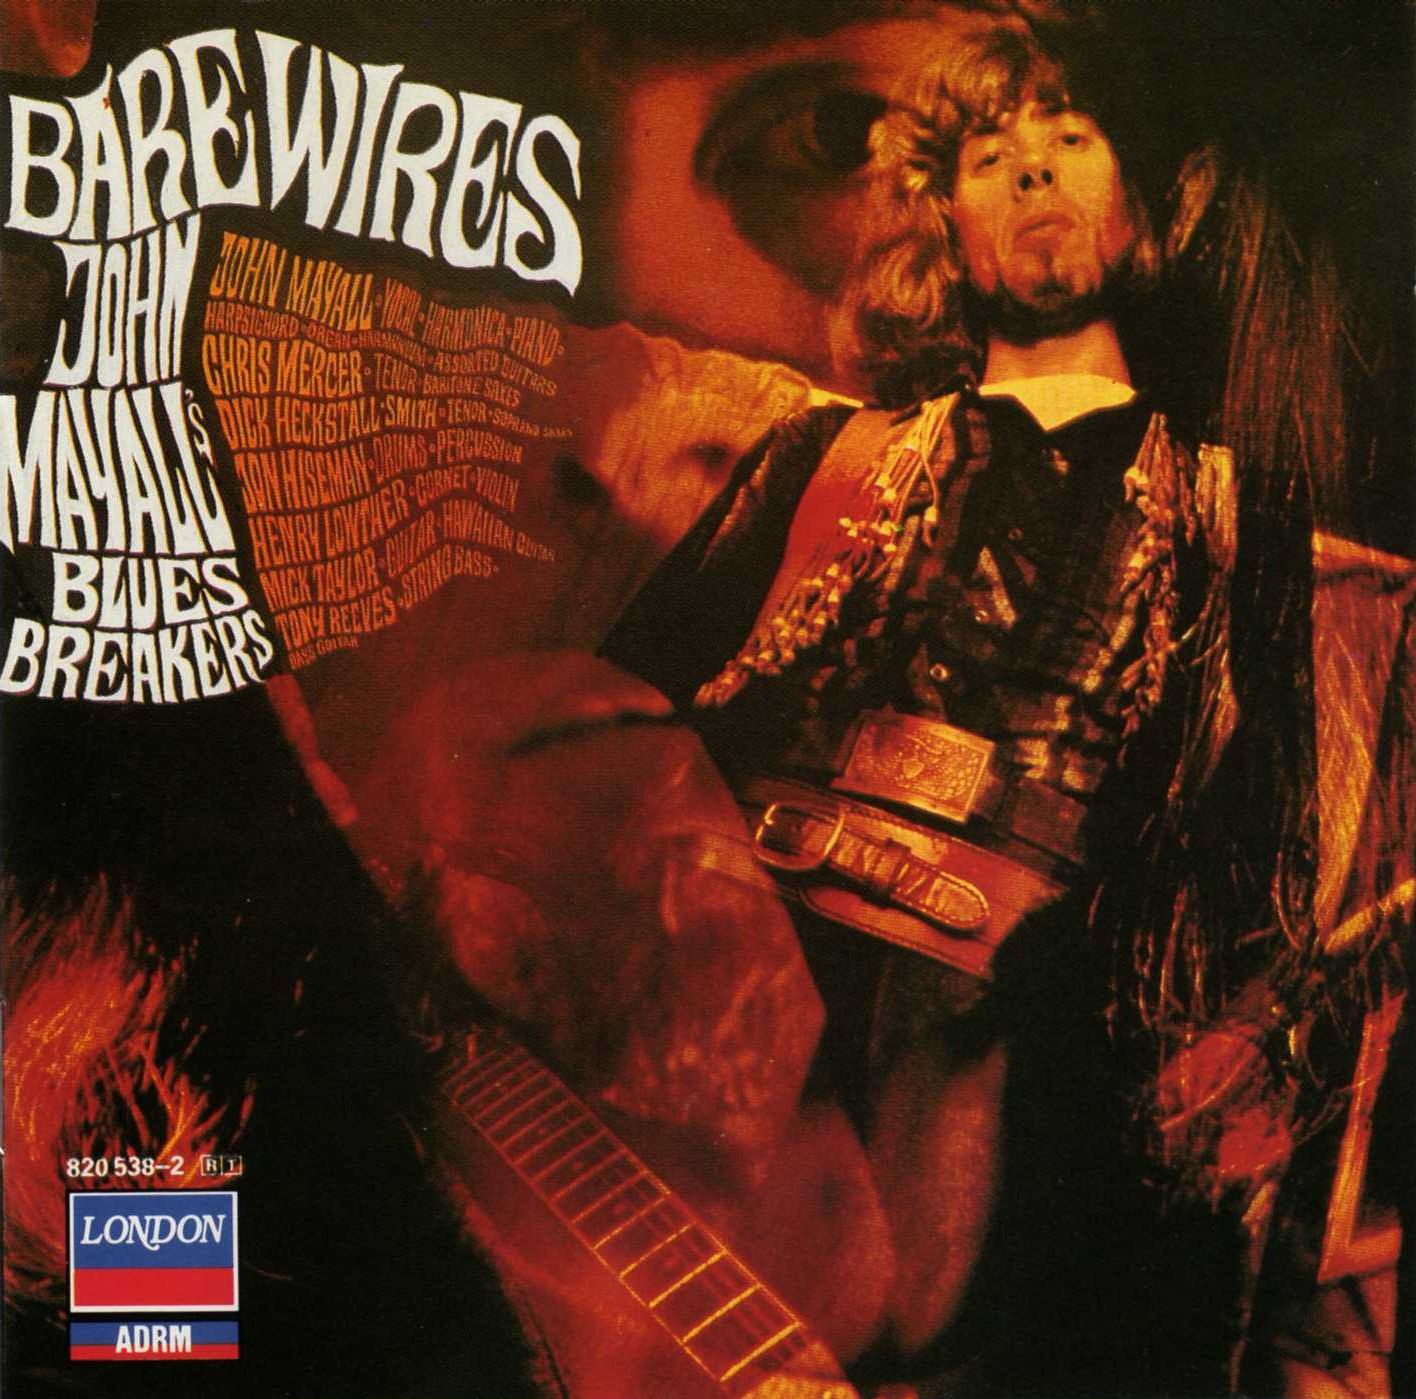 john_mayall_-_bare_wires_-_front.jpg